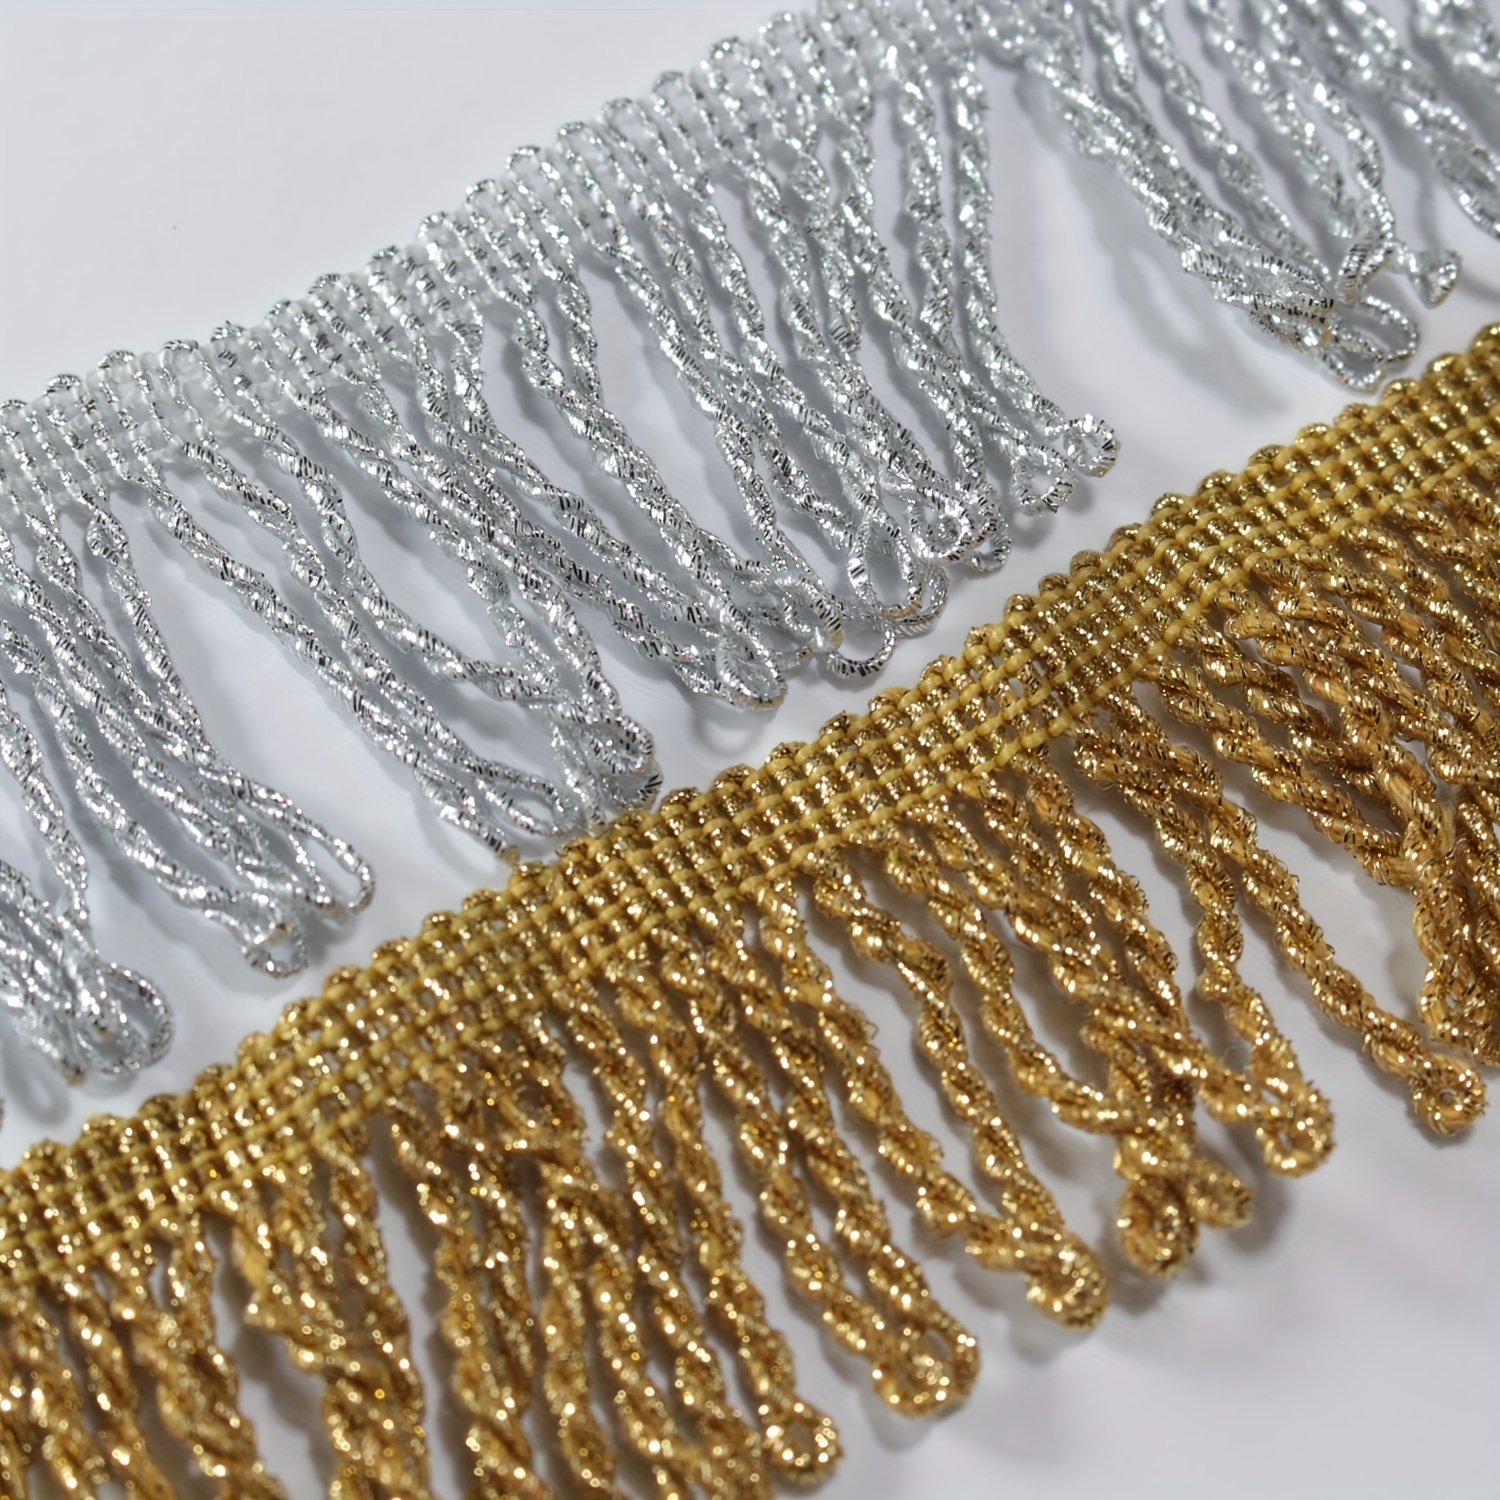 

1pc Silver And Gold Bullion Fringe Trim, 5cm/1.96 Inches Wide, Curtain Fringes Fabric Trim For Diy Sewing, Home Decor, Sofa, Clothes Decoration